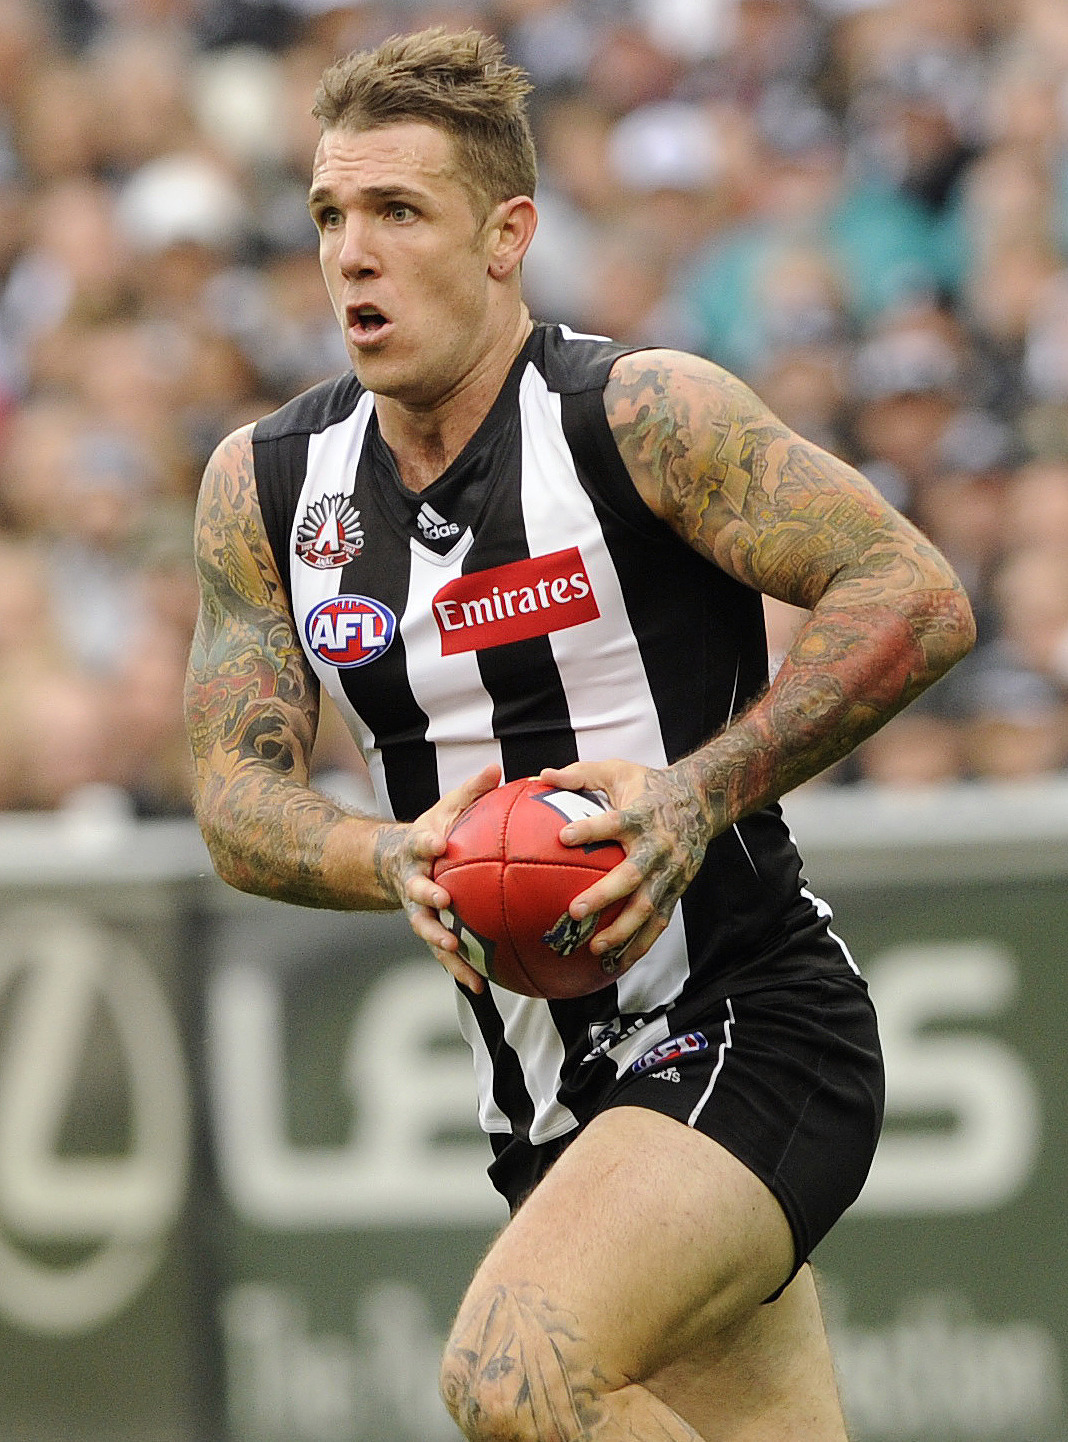 Collingwood player Dane Swan runs with the ball as the Magpies play Essendon during the Anzac Day round five match in Melbourne, Wednesday, April 25, 2012. Collingwood won by one point. (AAP Image/Julian Smith) NO ARCHIVING, EDITORIAL USE ONLY